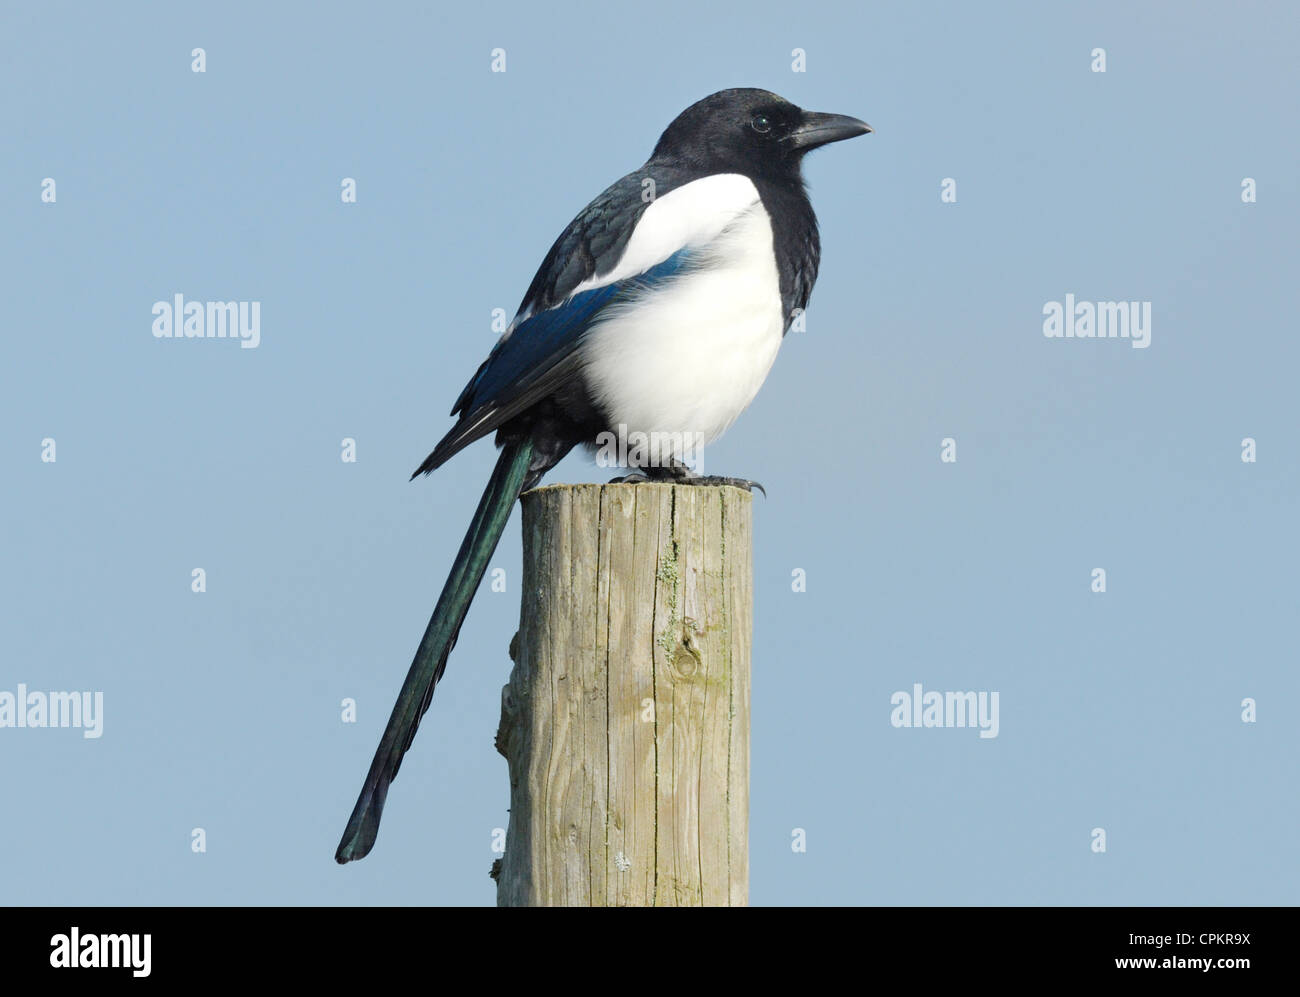 European Magpie (Pica pica) sitting on a post in Kenfig National Nature Reserve, Wales, UK. October 2011. Stock Photo